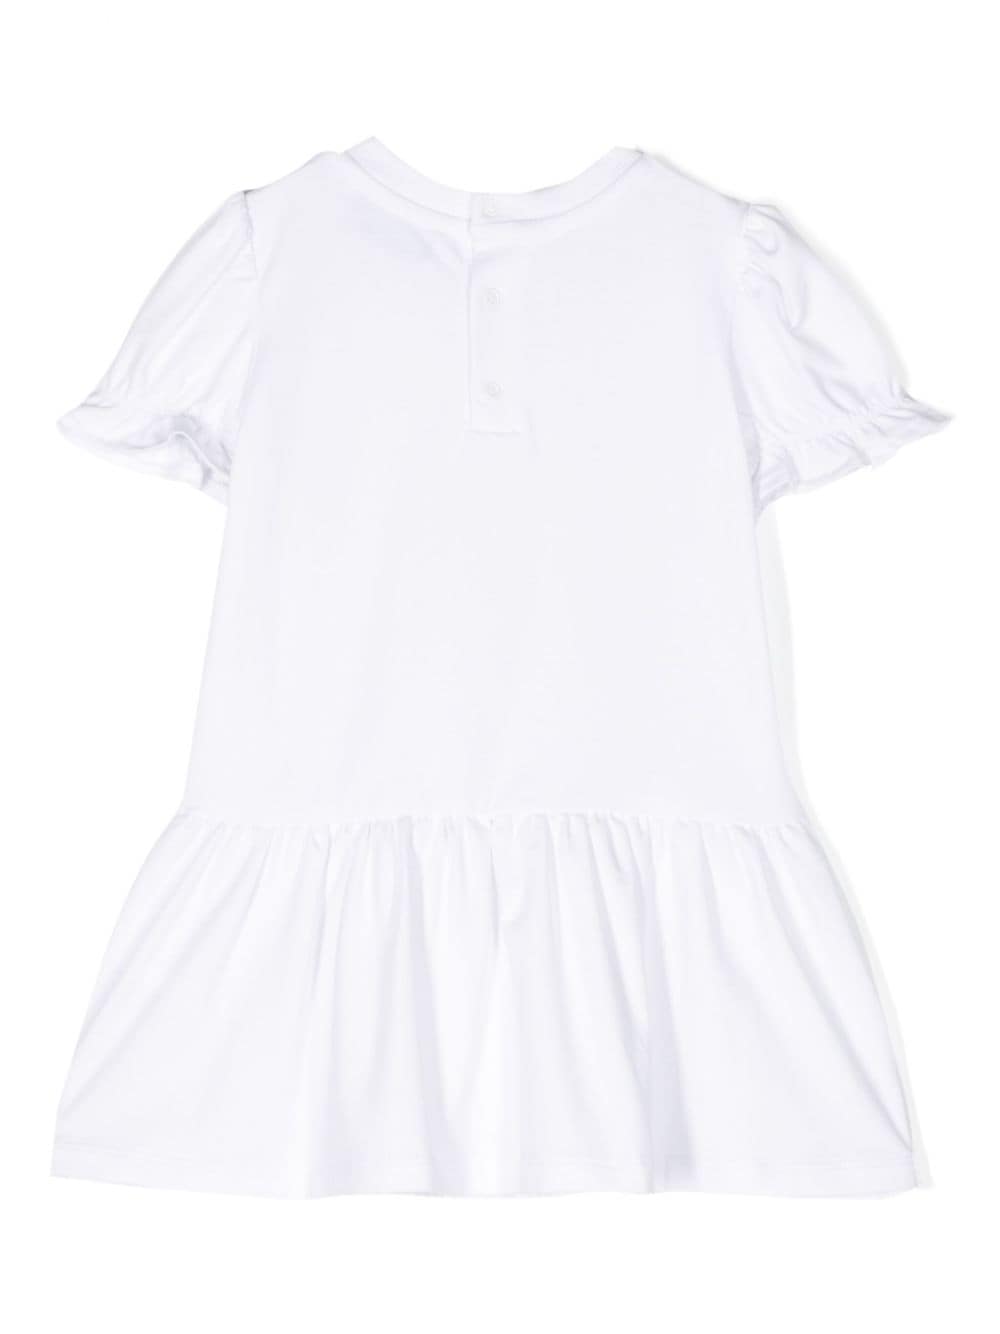 White dress for baby girls with bear